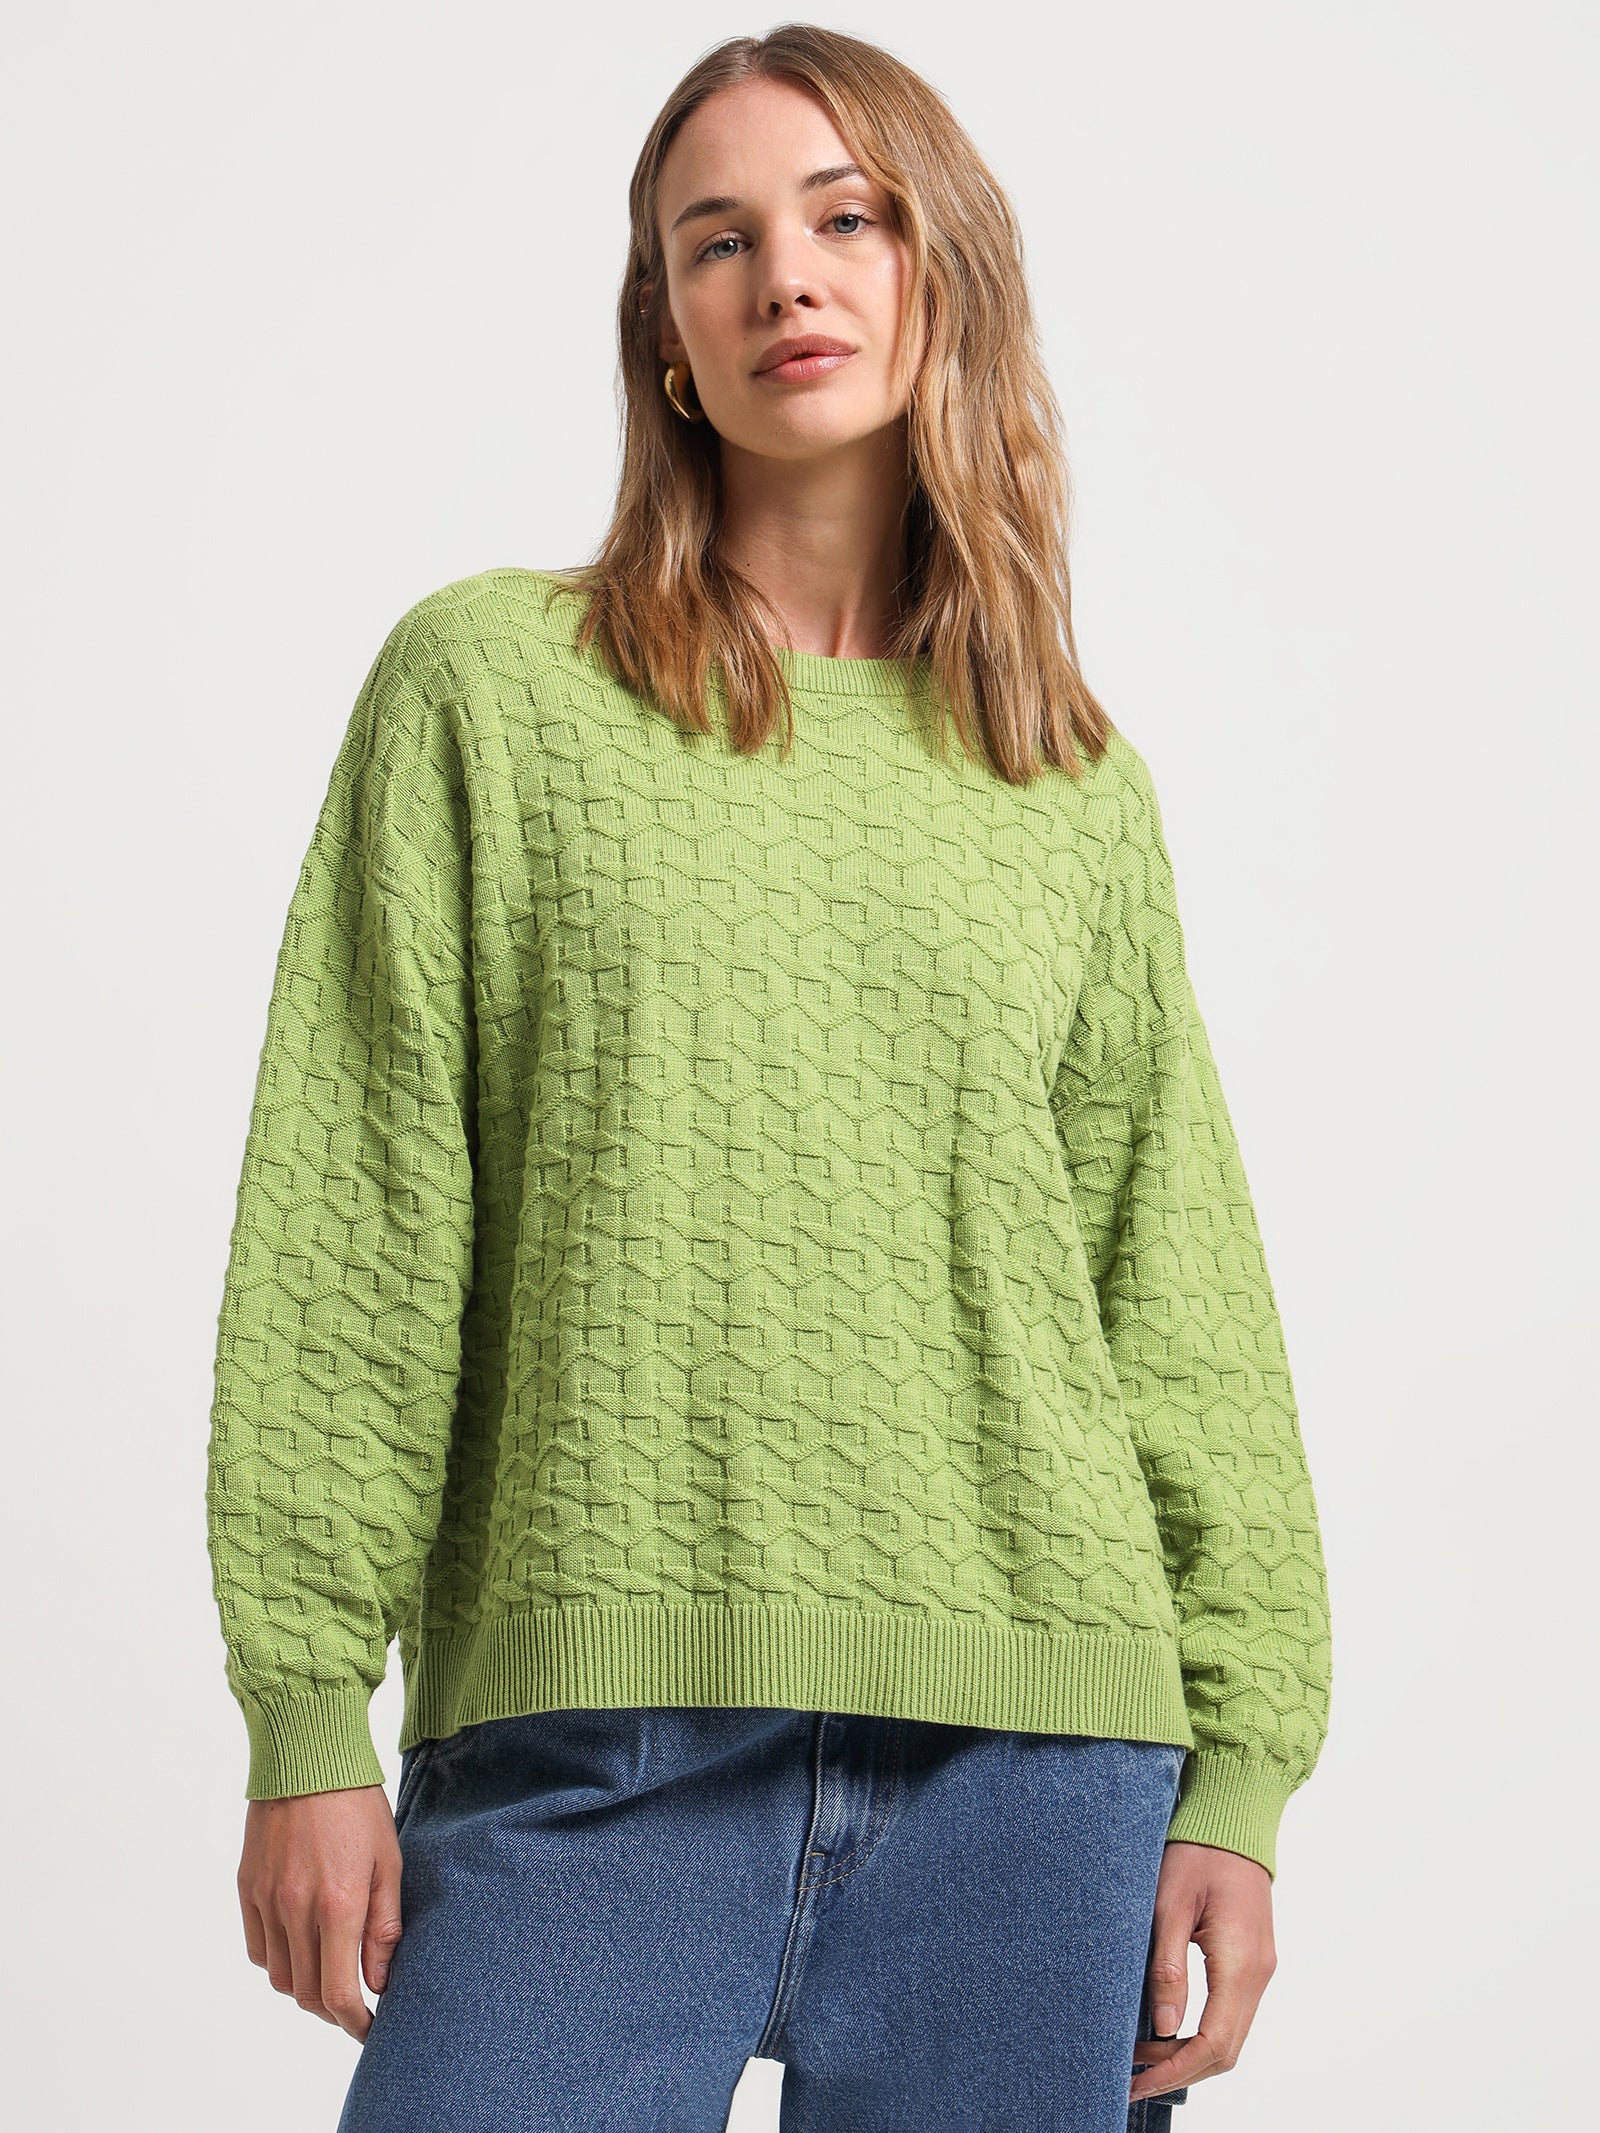 Strand Knit in Lime - Glue Store